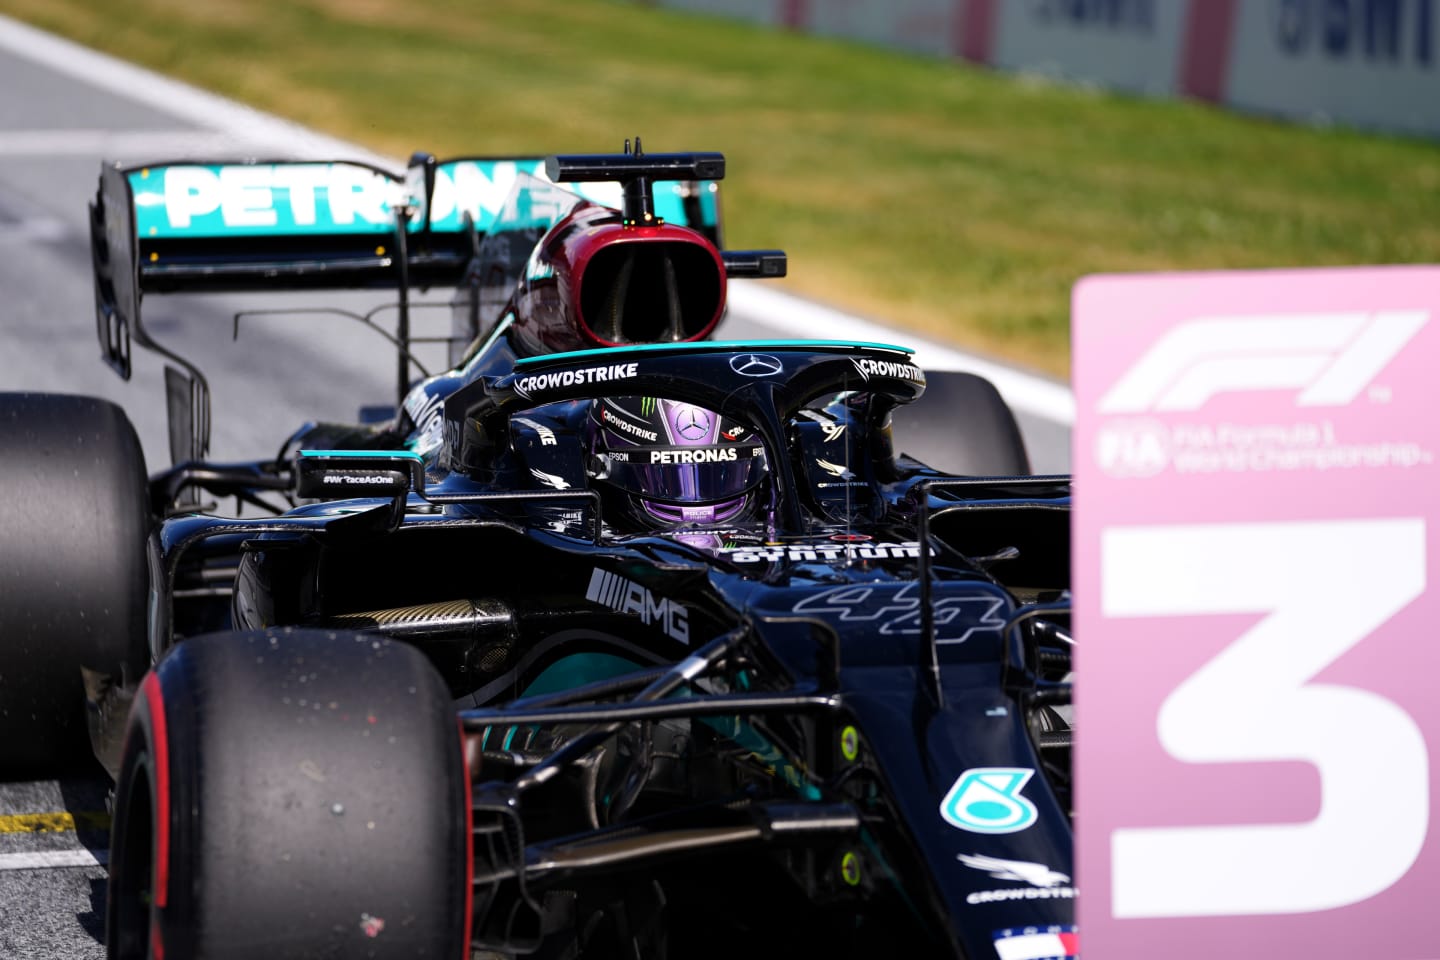 SPIELBERG, AUSTRIA - JUNE 26: Third place qualifier Lewis Hamilton of Great Britain and Mercedes GP stops in parc ferme during qualifying ahead of the F1 Grand Prix of Styria at Red Bull Ring on June 26, 2021 in Spielberg, Austria. (Photo by Darko Vojinovic - Pool/Getty Images)